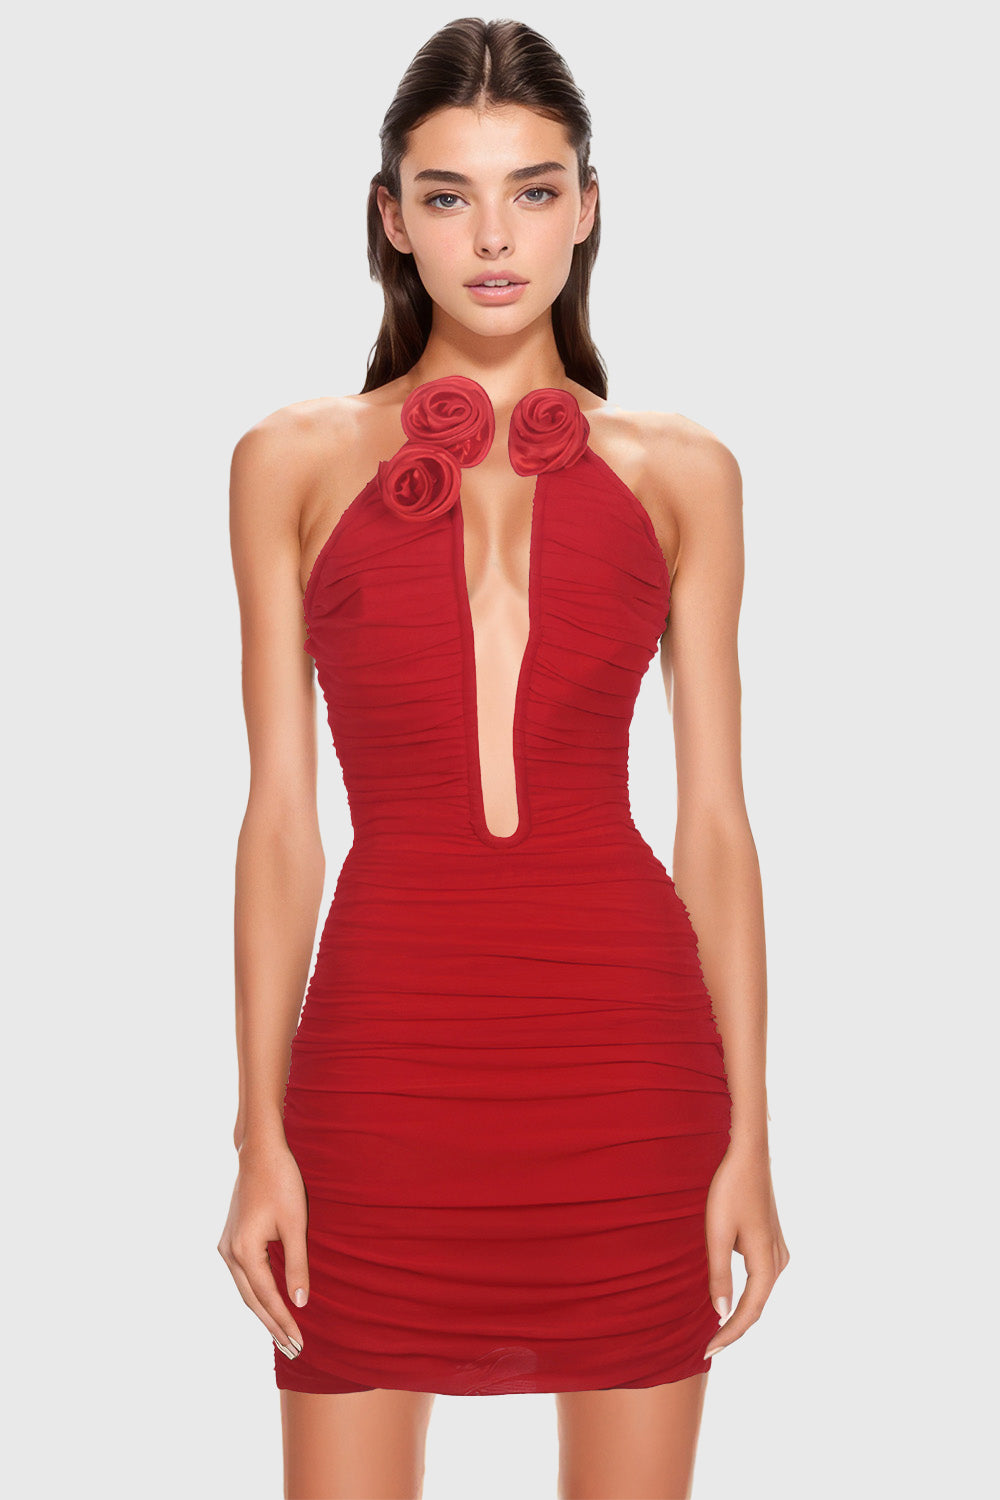 Mini Dress with Roses - Red